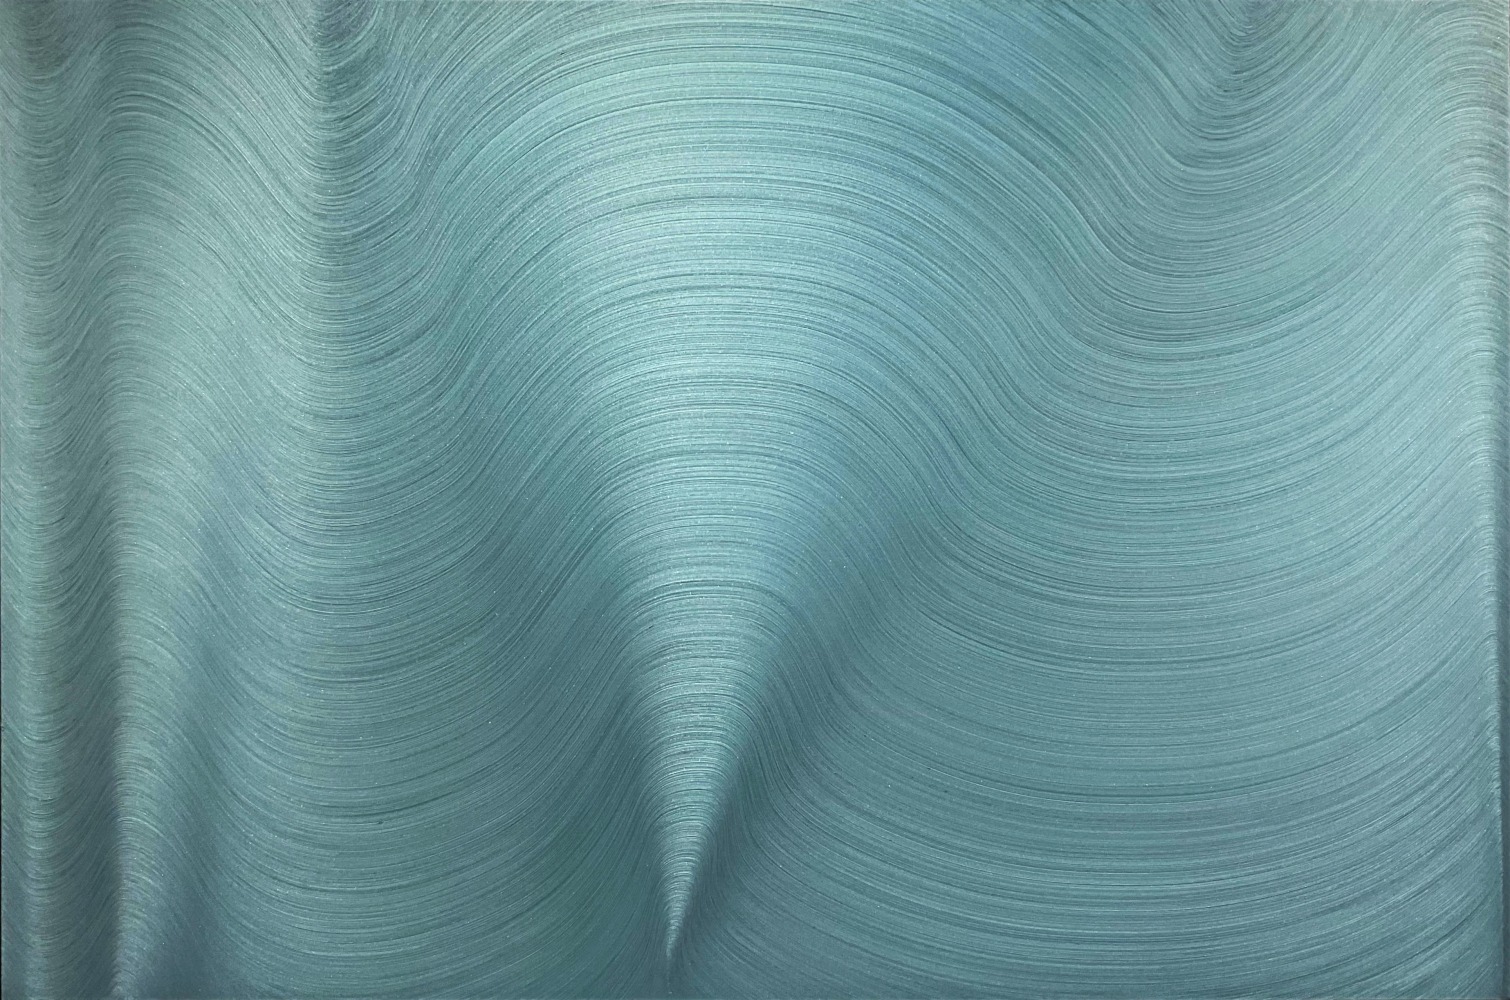 Optical (Teal), 2022

Oil on Canvas

48 x 72 inches

Purchase